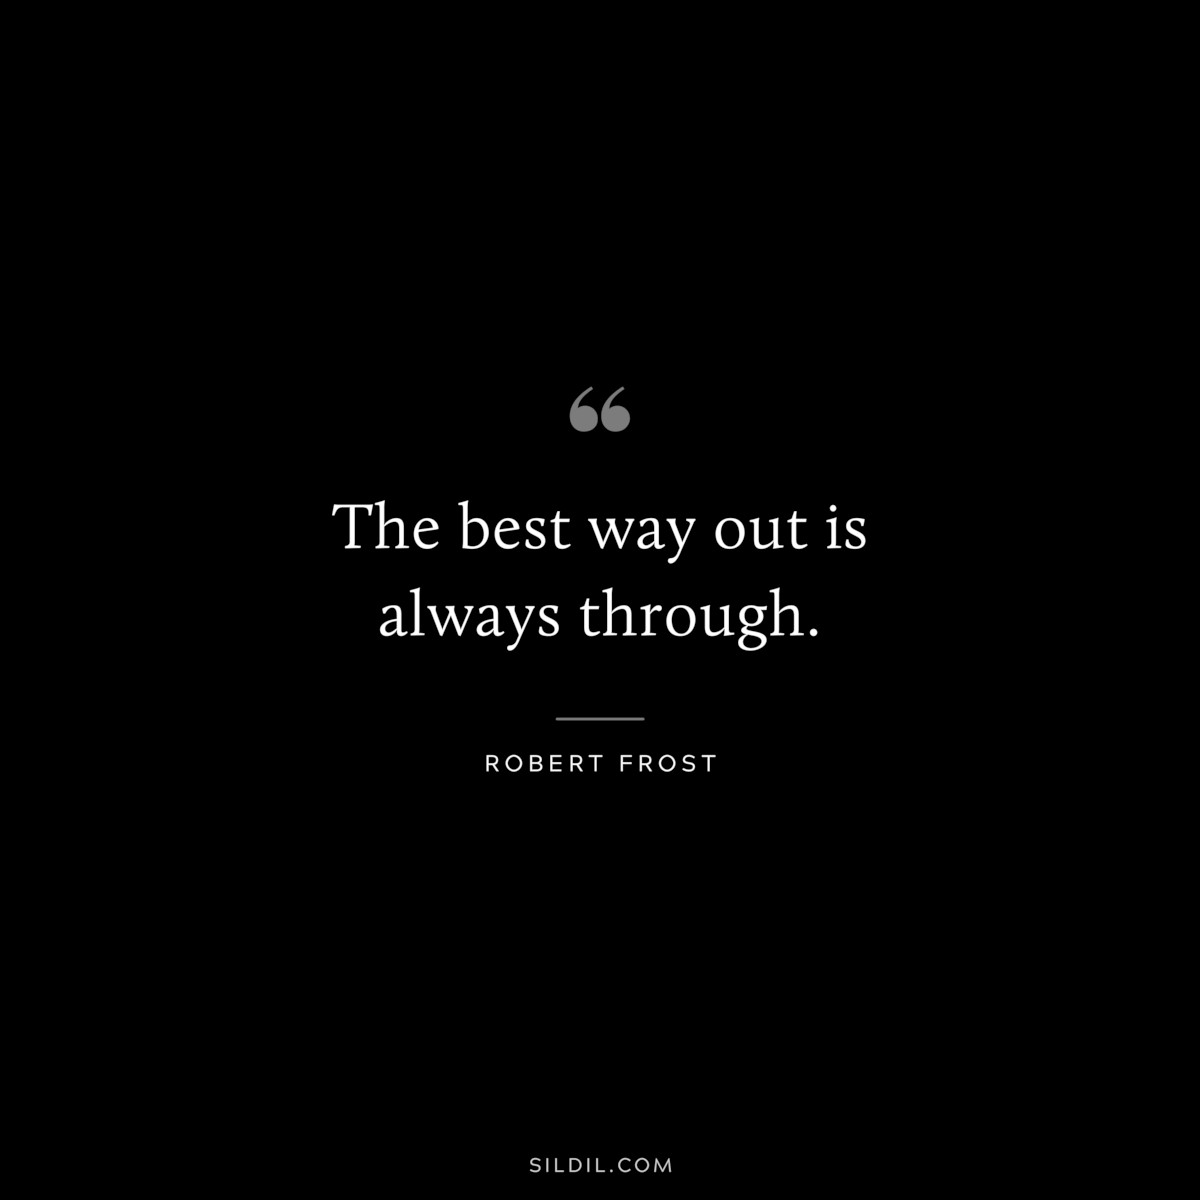 The best way out is always through. ― Robert Frost